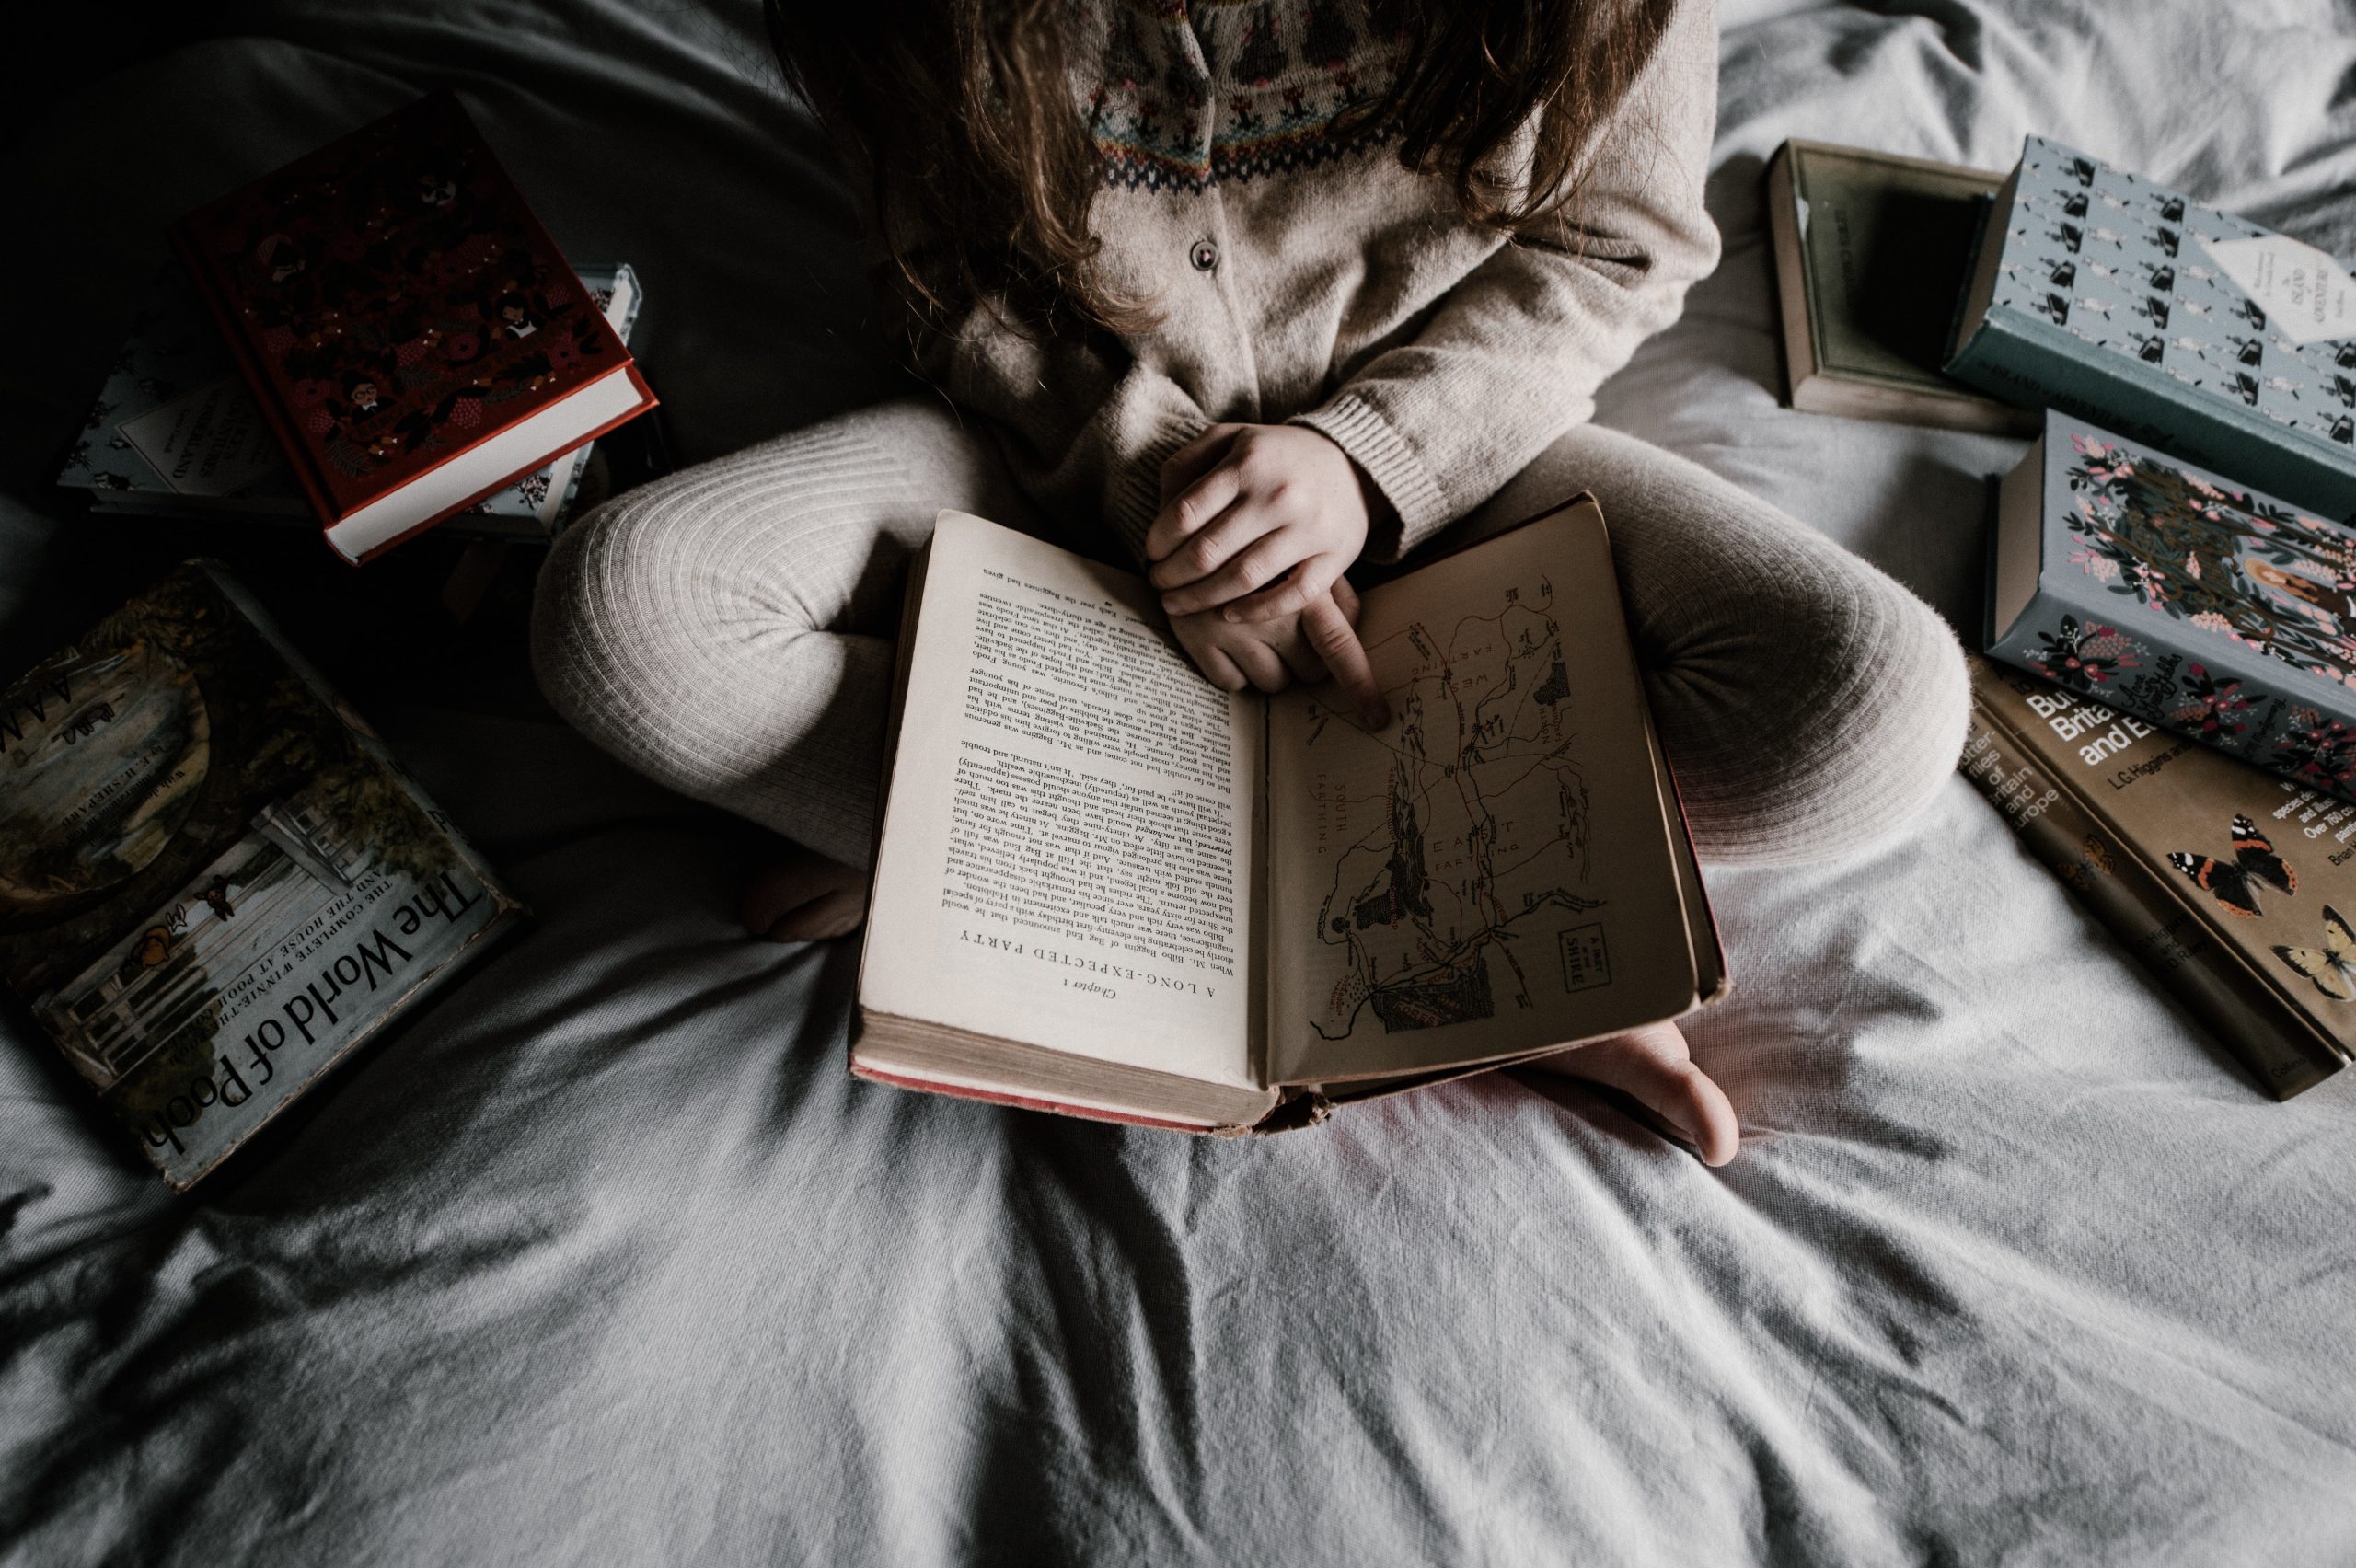 Girl in bed reading a bunch of books